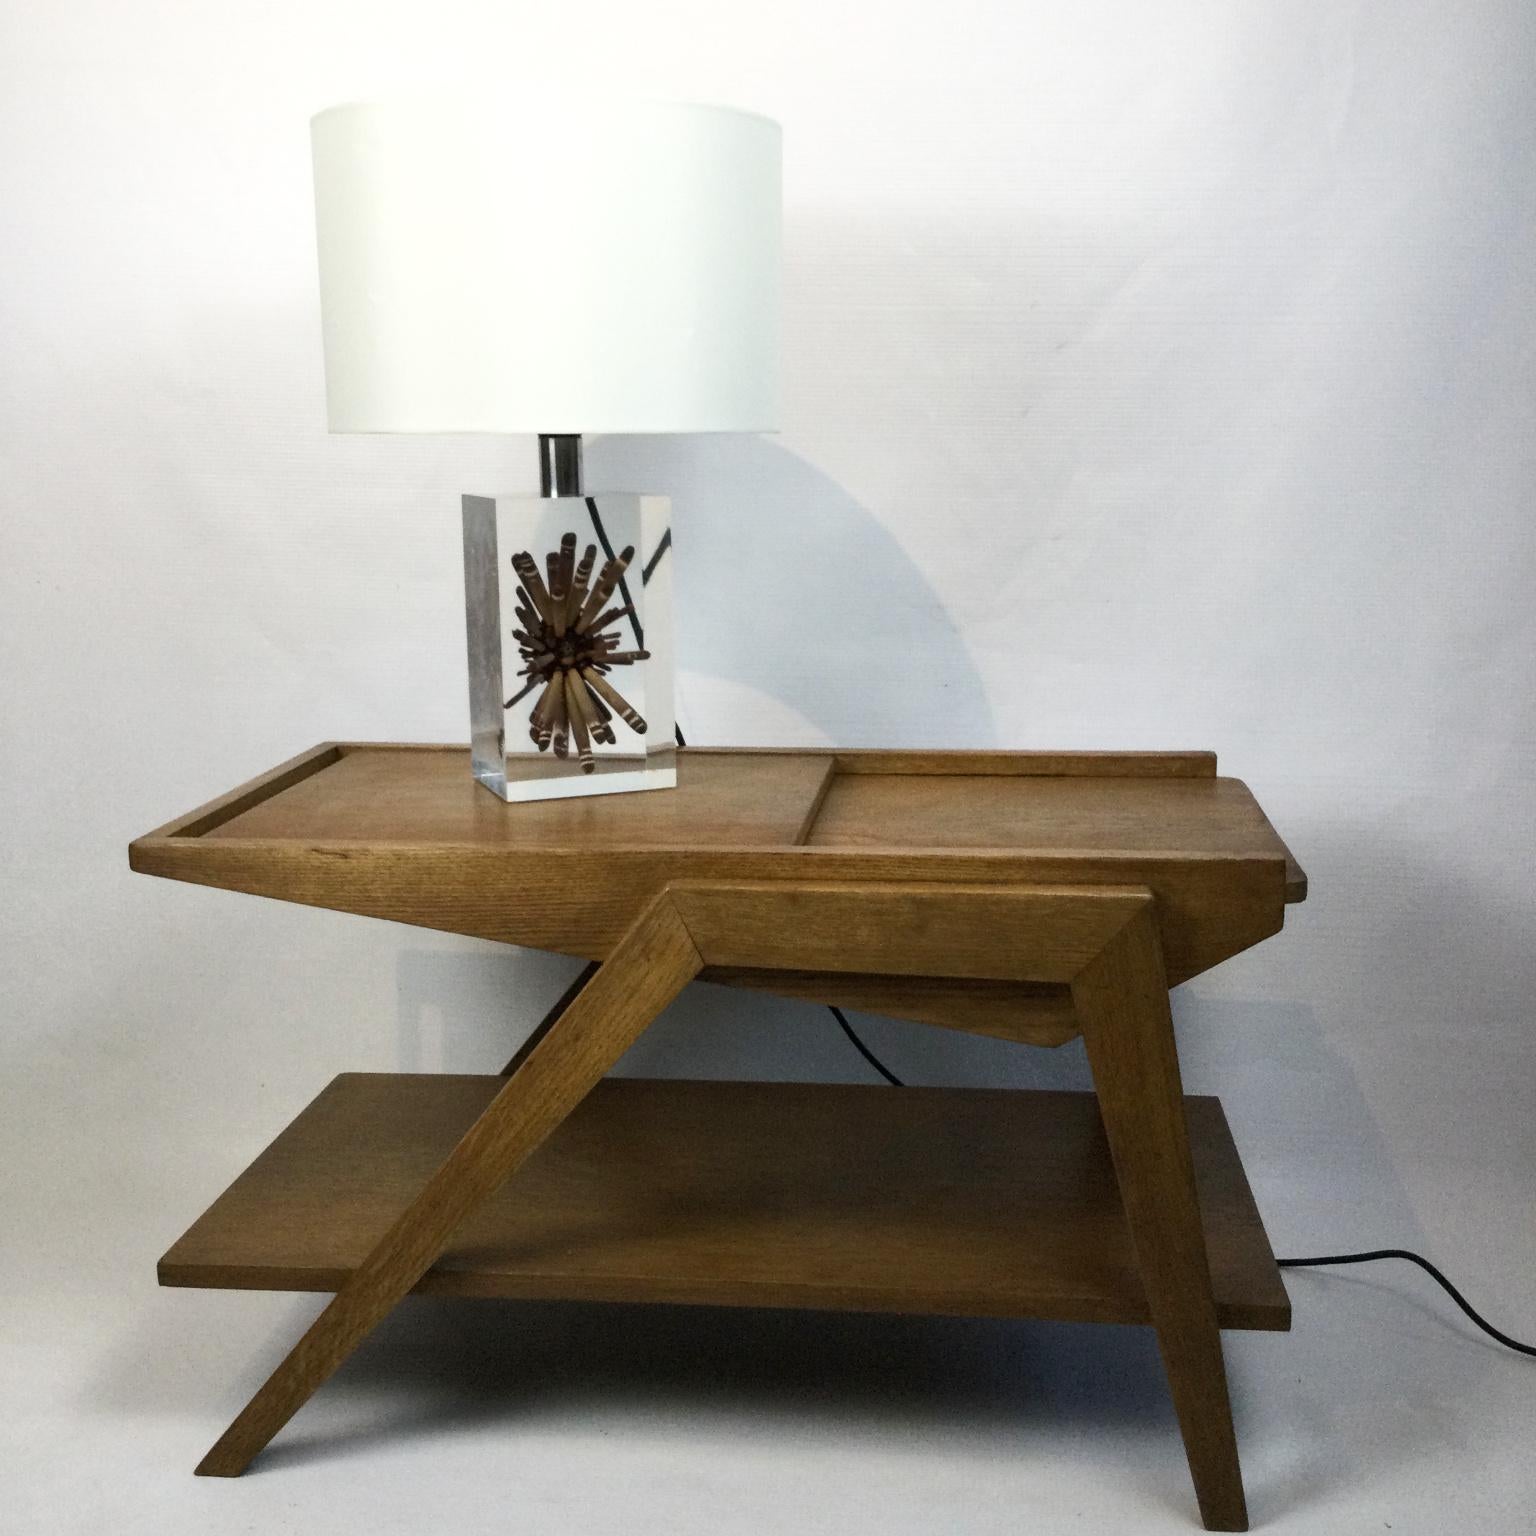 20th Century Pierre Giraudon 1970s Large Resin Table Lamp with Tropical Ursin Inclusion For Sale